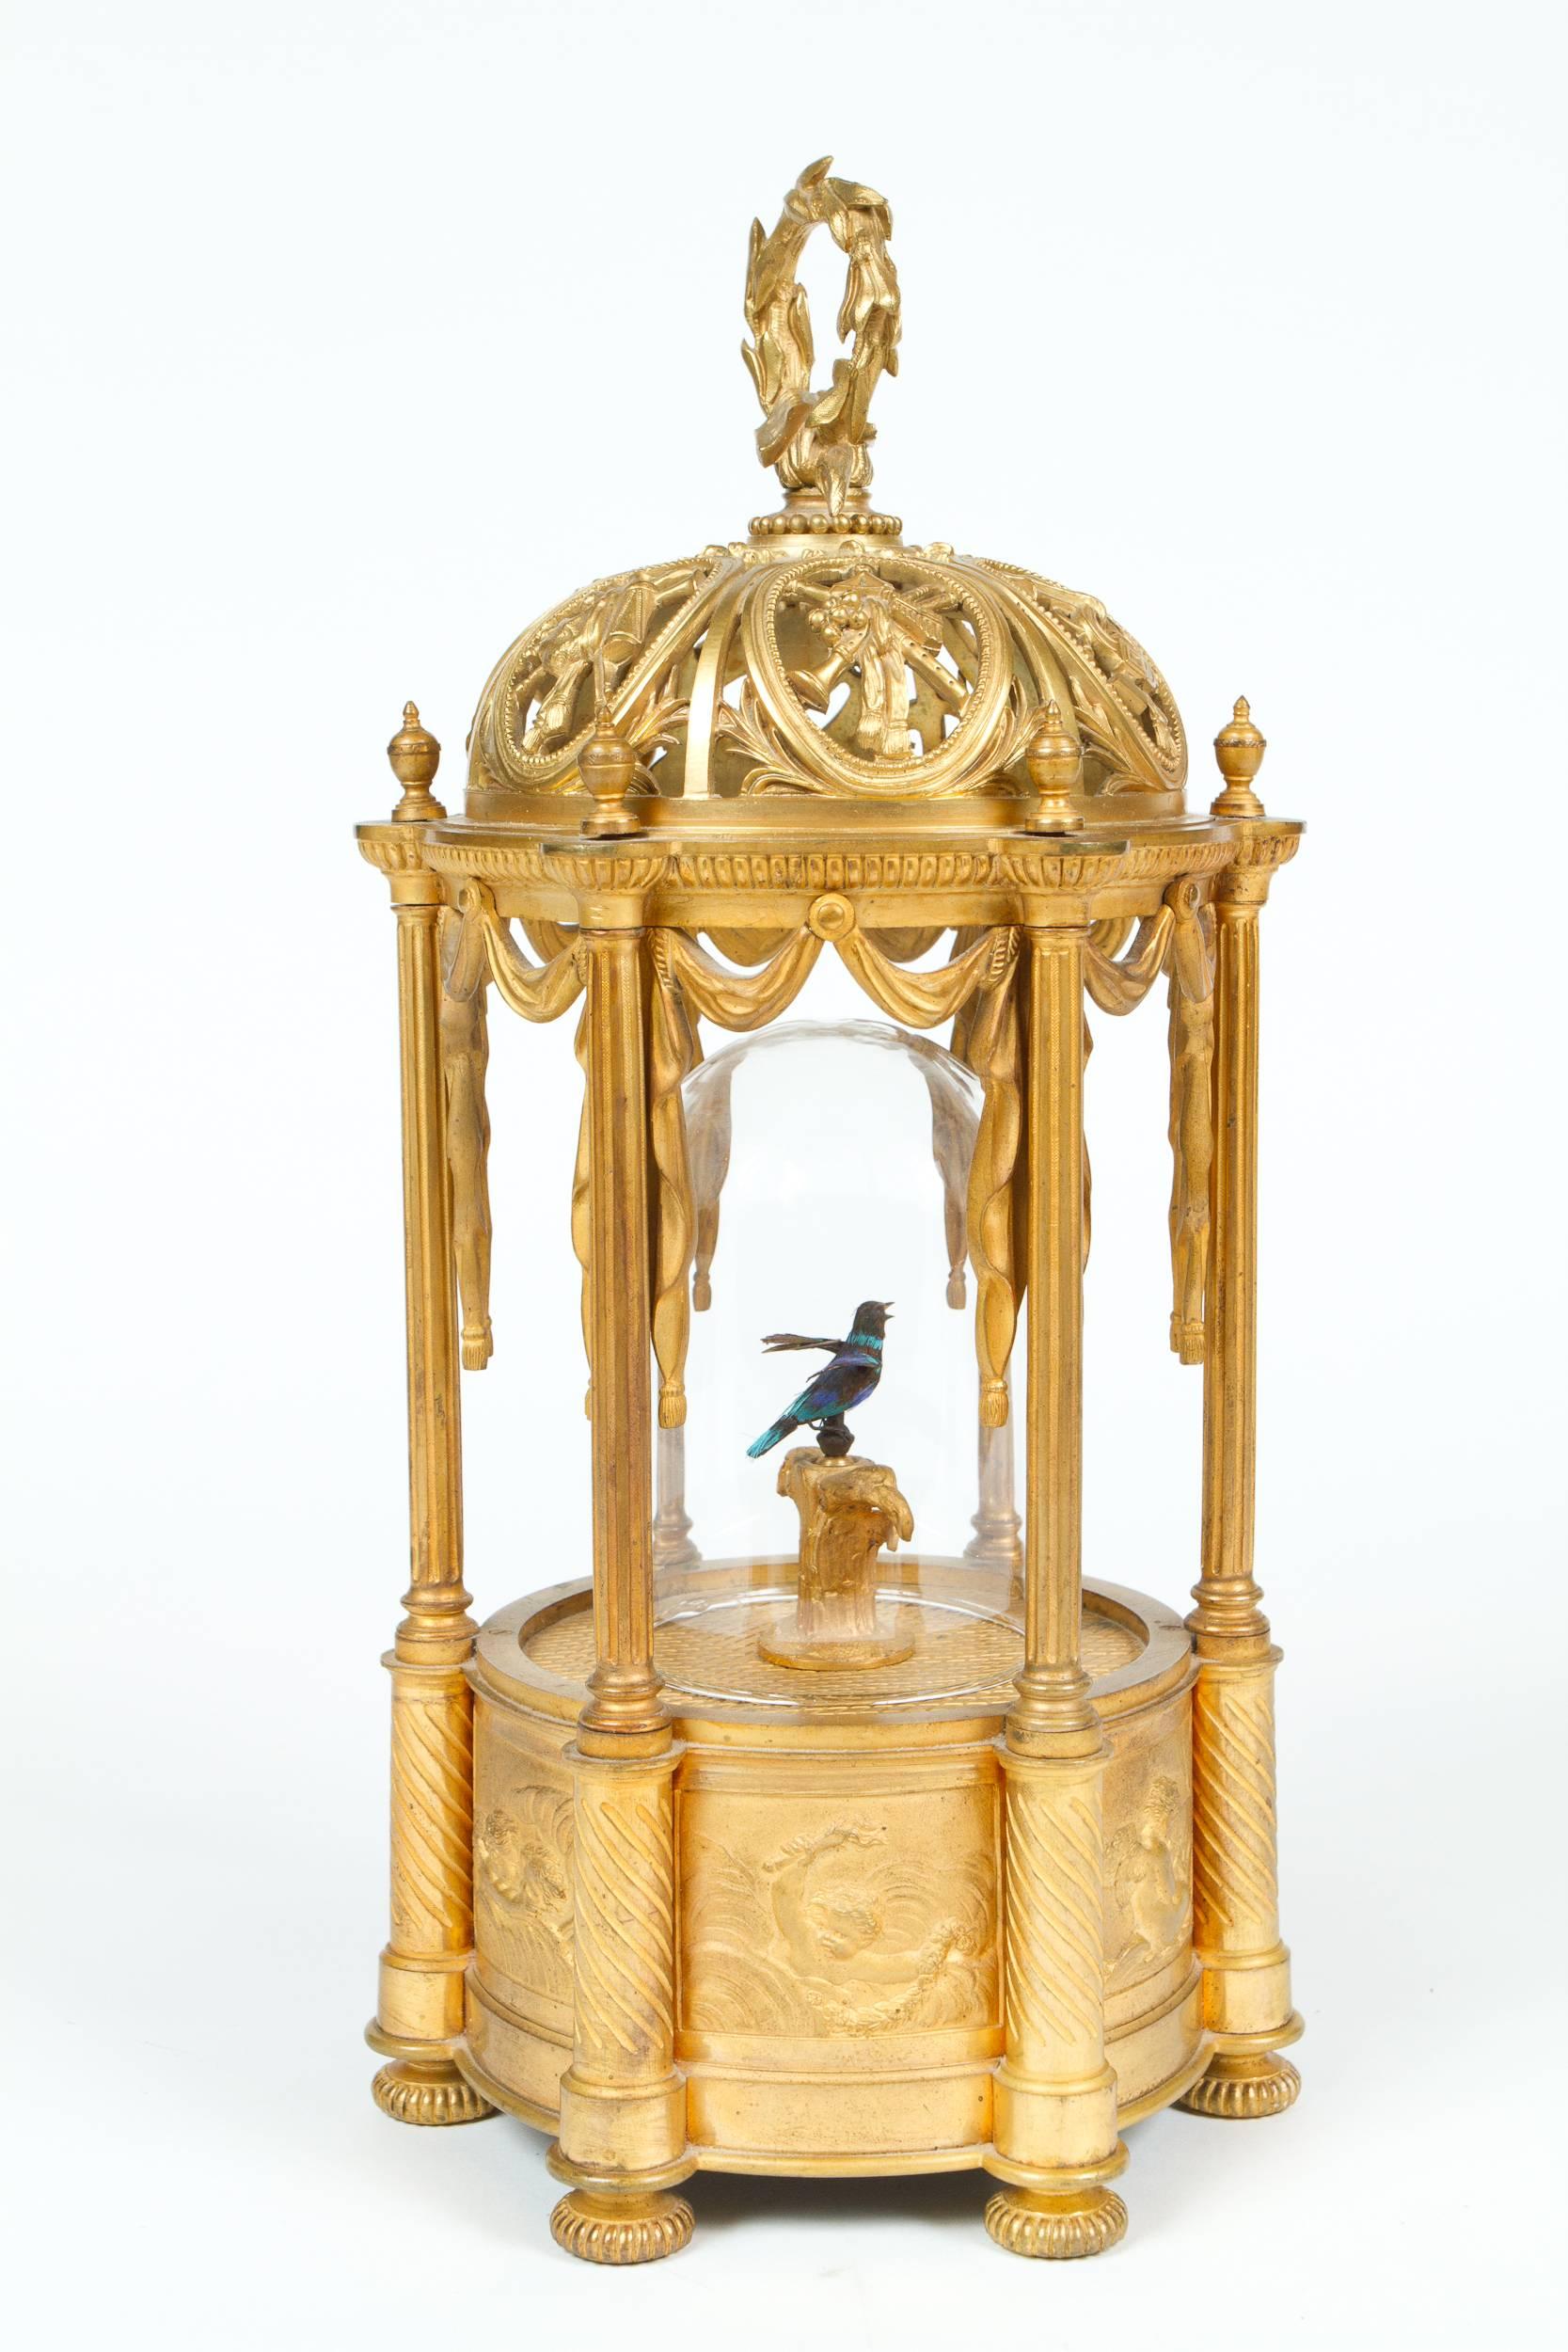 Rare and fine French antique  singing bird automaton attributed to Bontems displayed in beautiful neoclassical style gilt bronze cage. The complex, 19th century mechanism recreates extremely realistic birdsong via a system of springs, gears, bellows